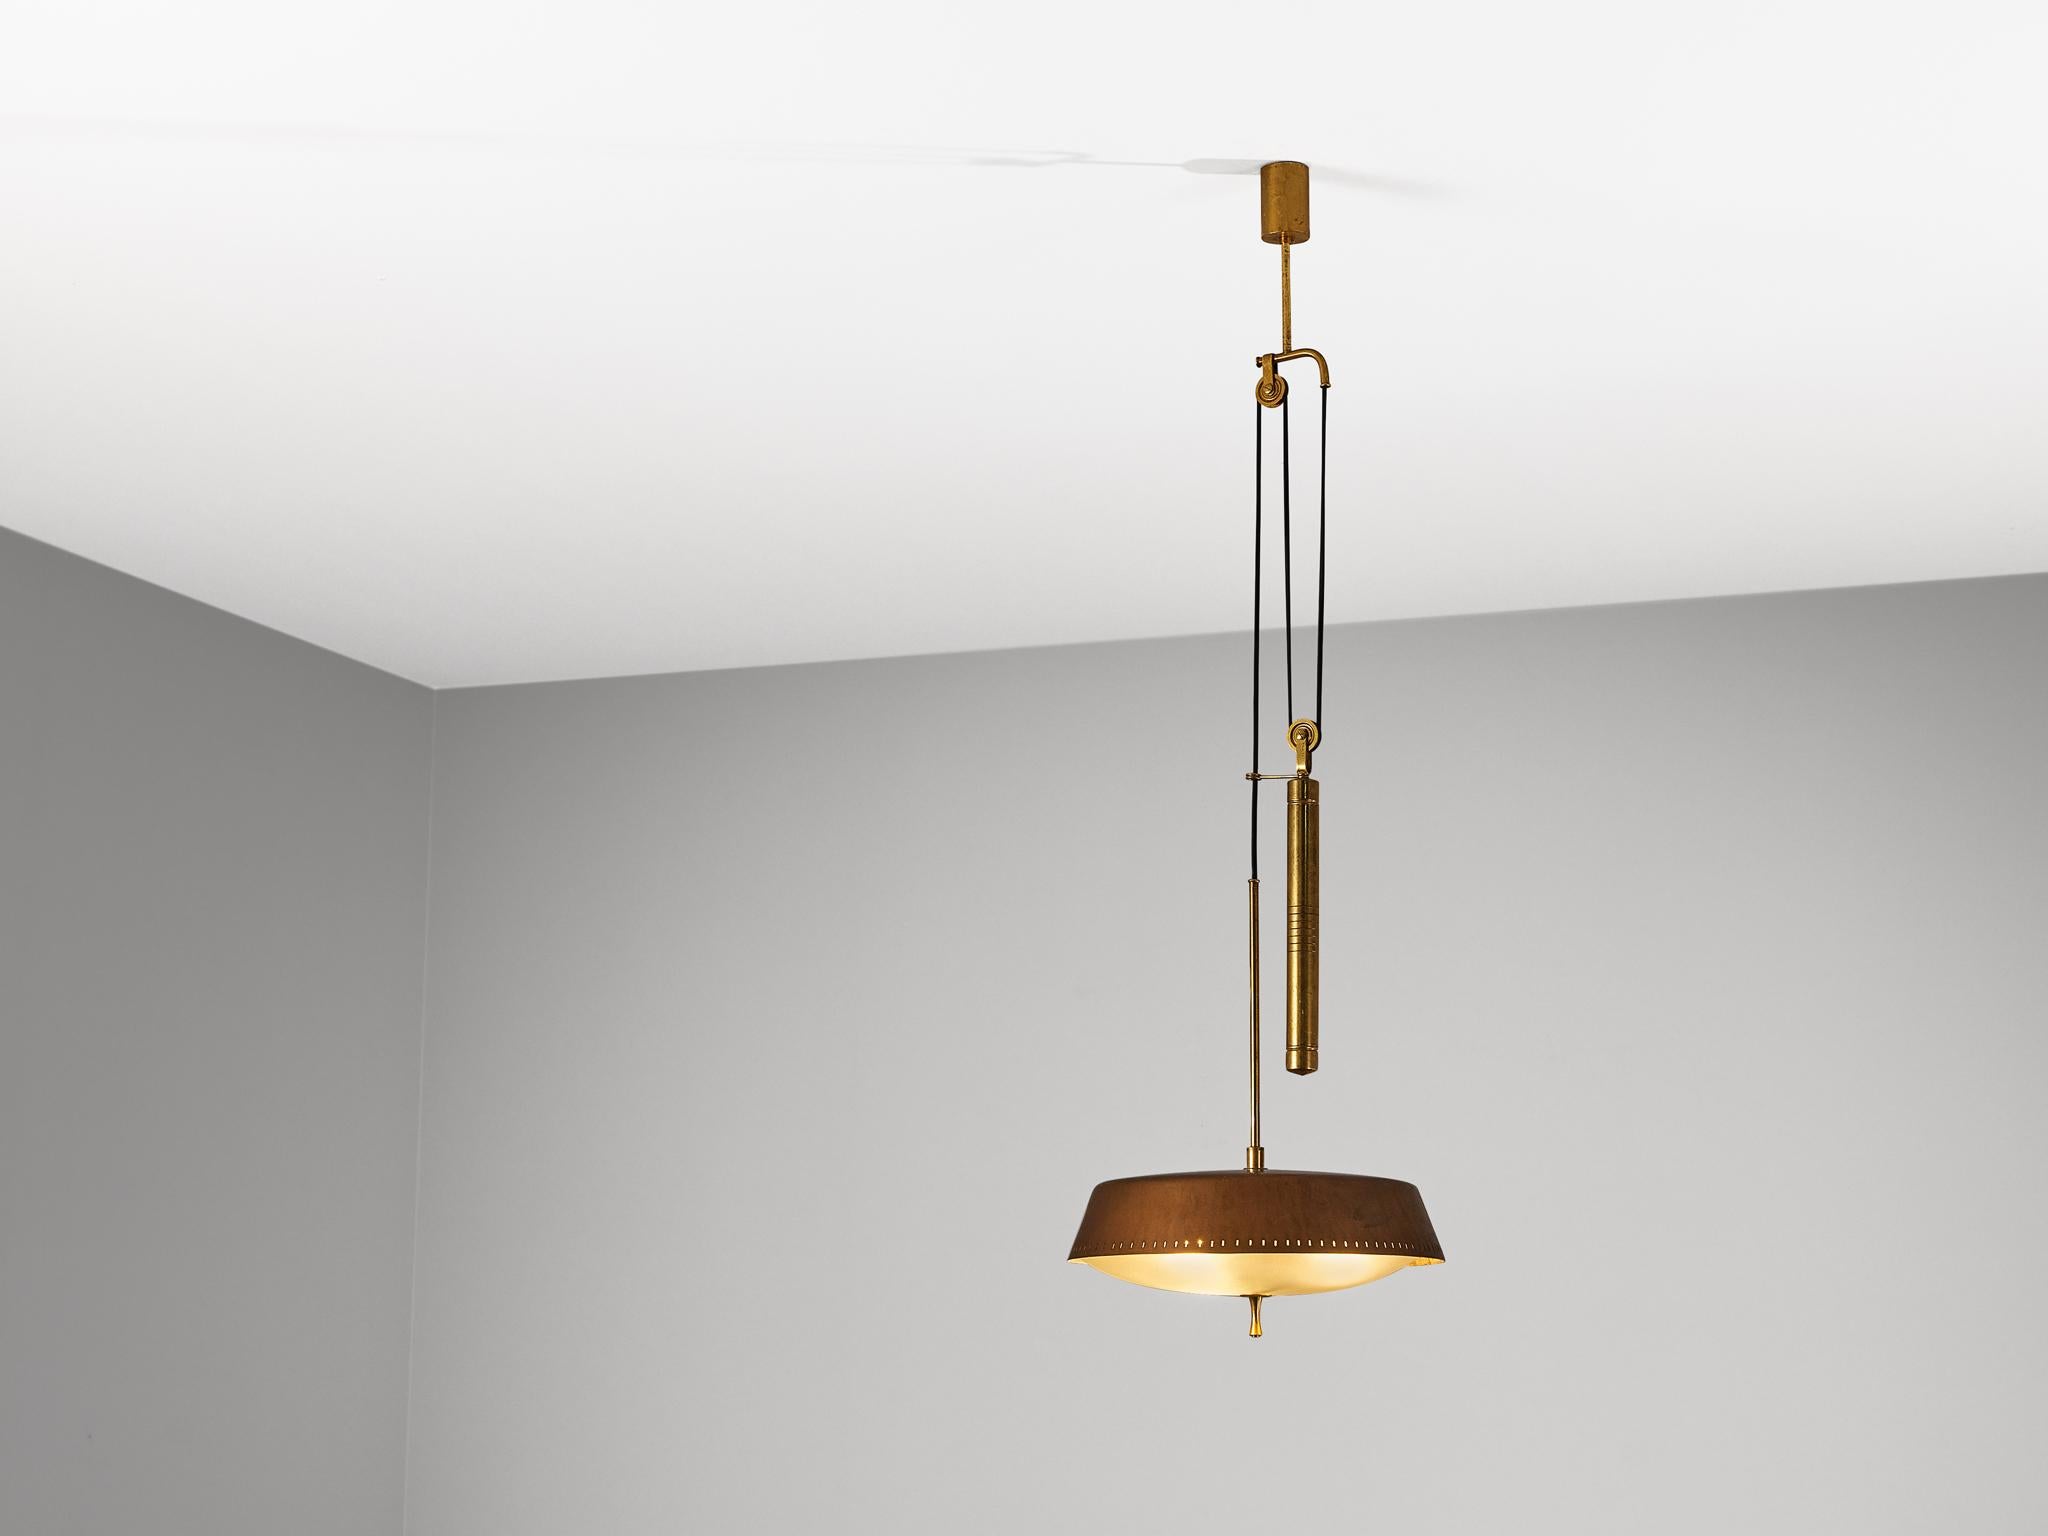 Pendant, copper, satin glass, brass, Italy, 1950s

Made in Italy, this ceiling light is designed according to the midcentury design principles that were in vogue in the fifties. The lamp bears witness to the designer's excellent taste for form and